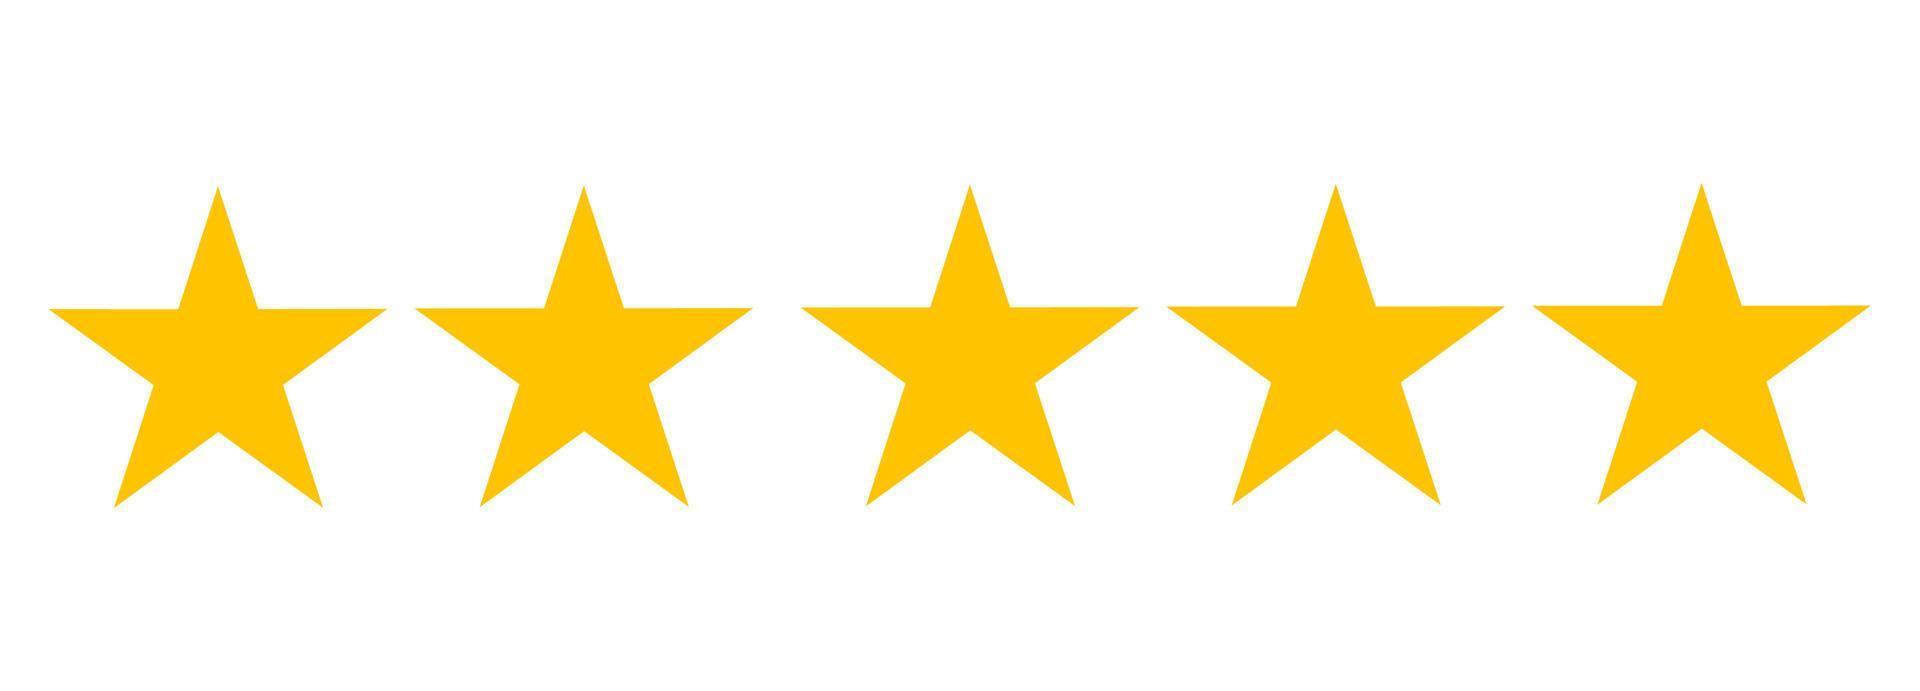 illustration of a star.five yellow rating stars vector